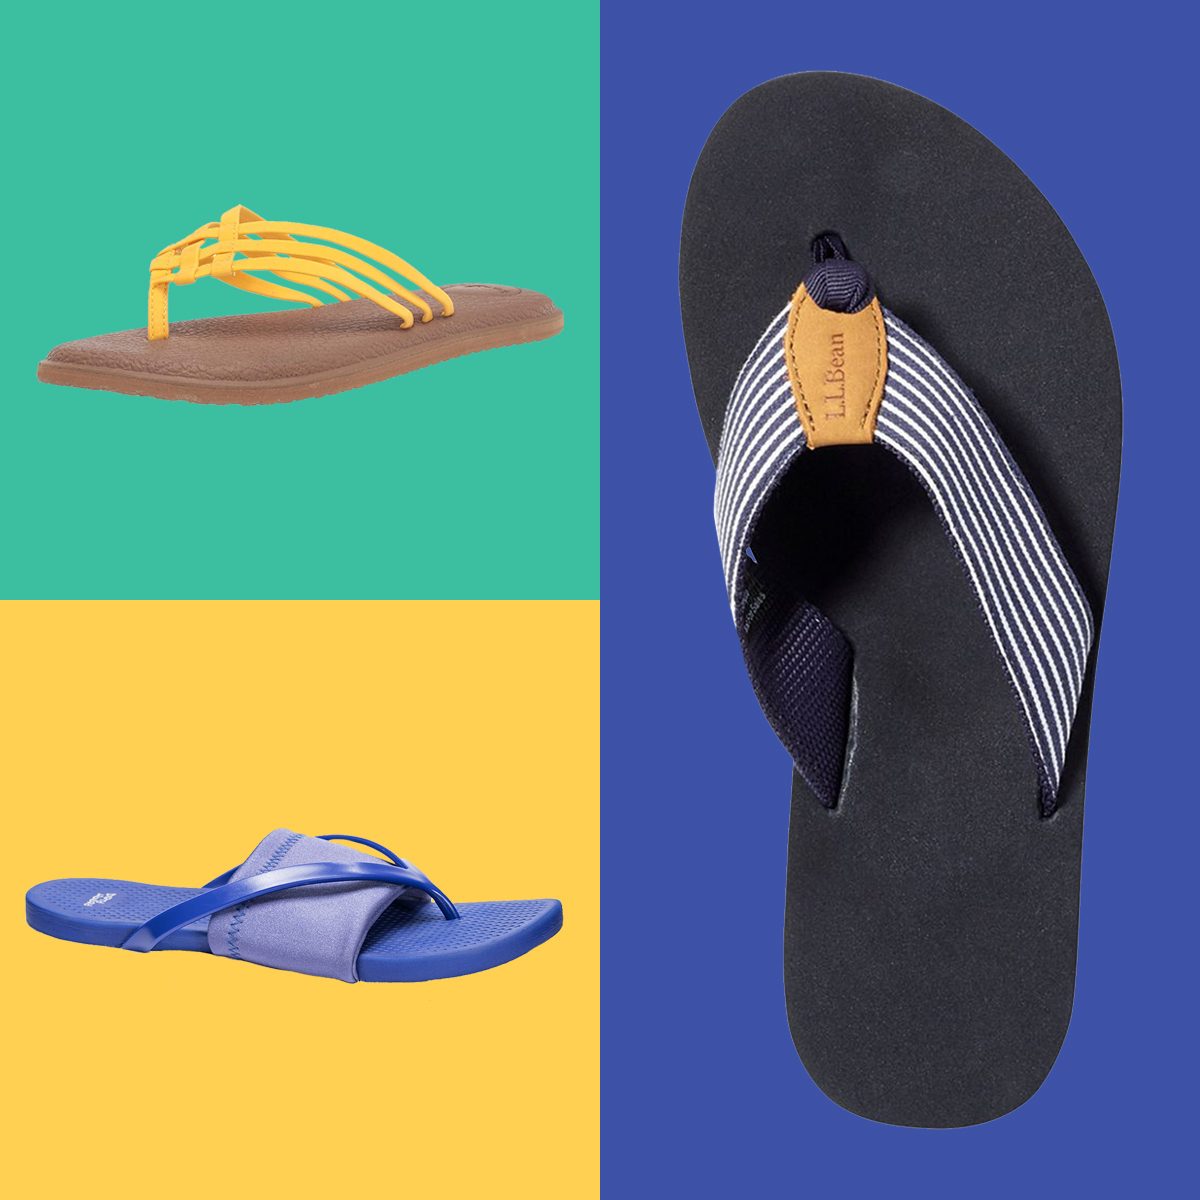 Fashionable Flip Flop Sandals For All Ages 